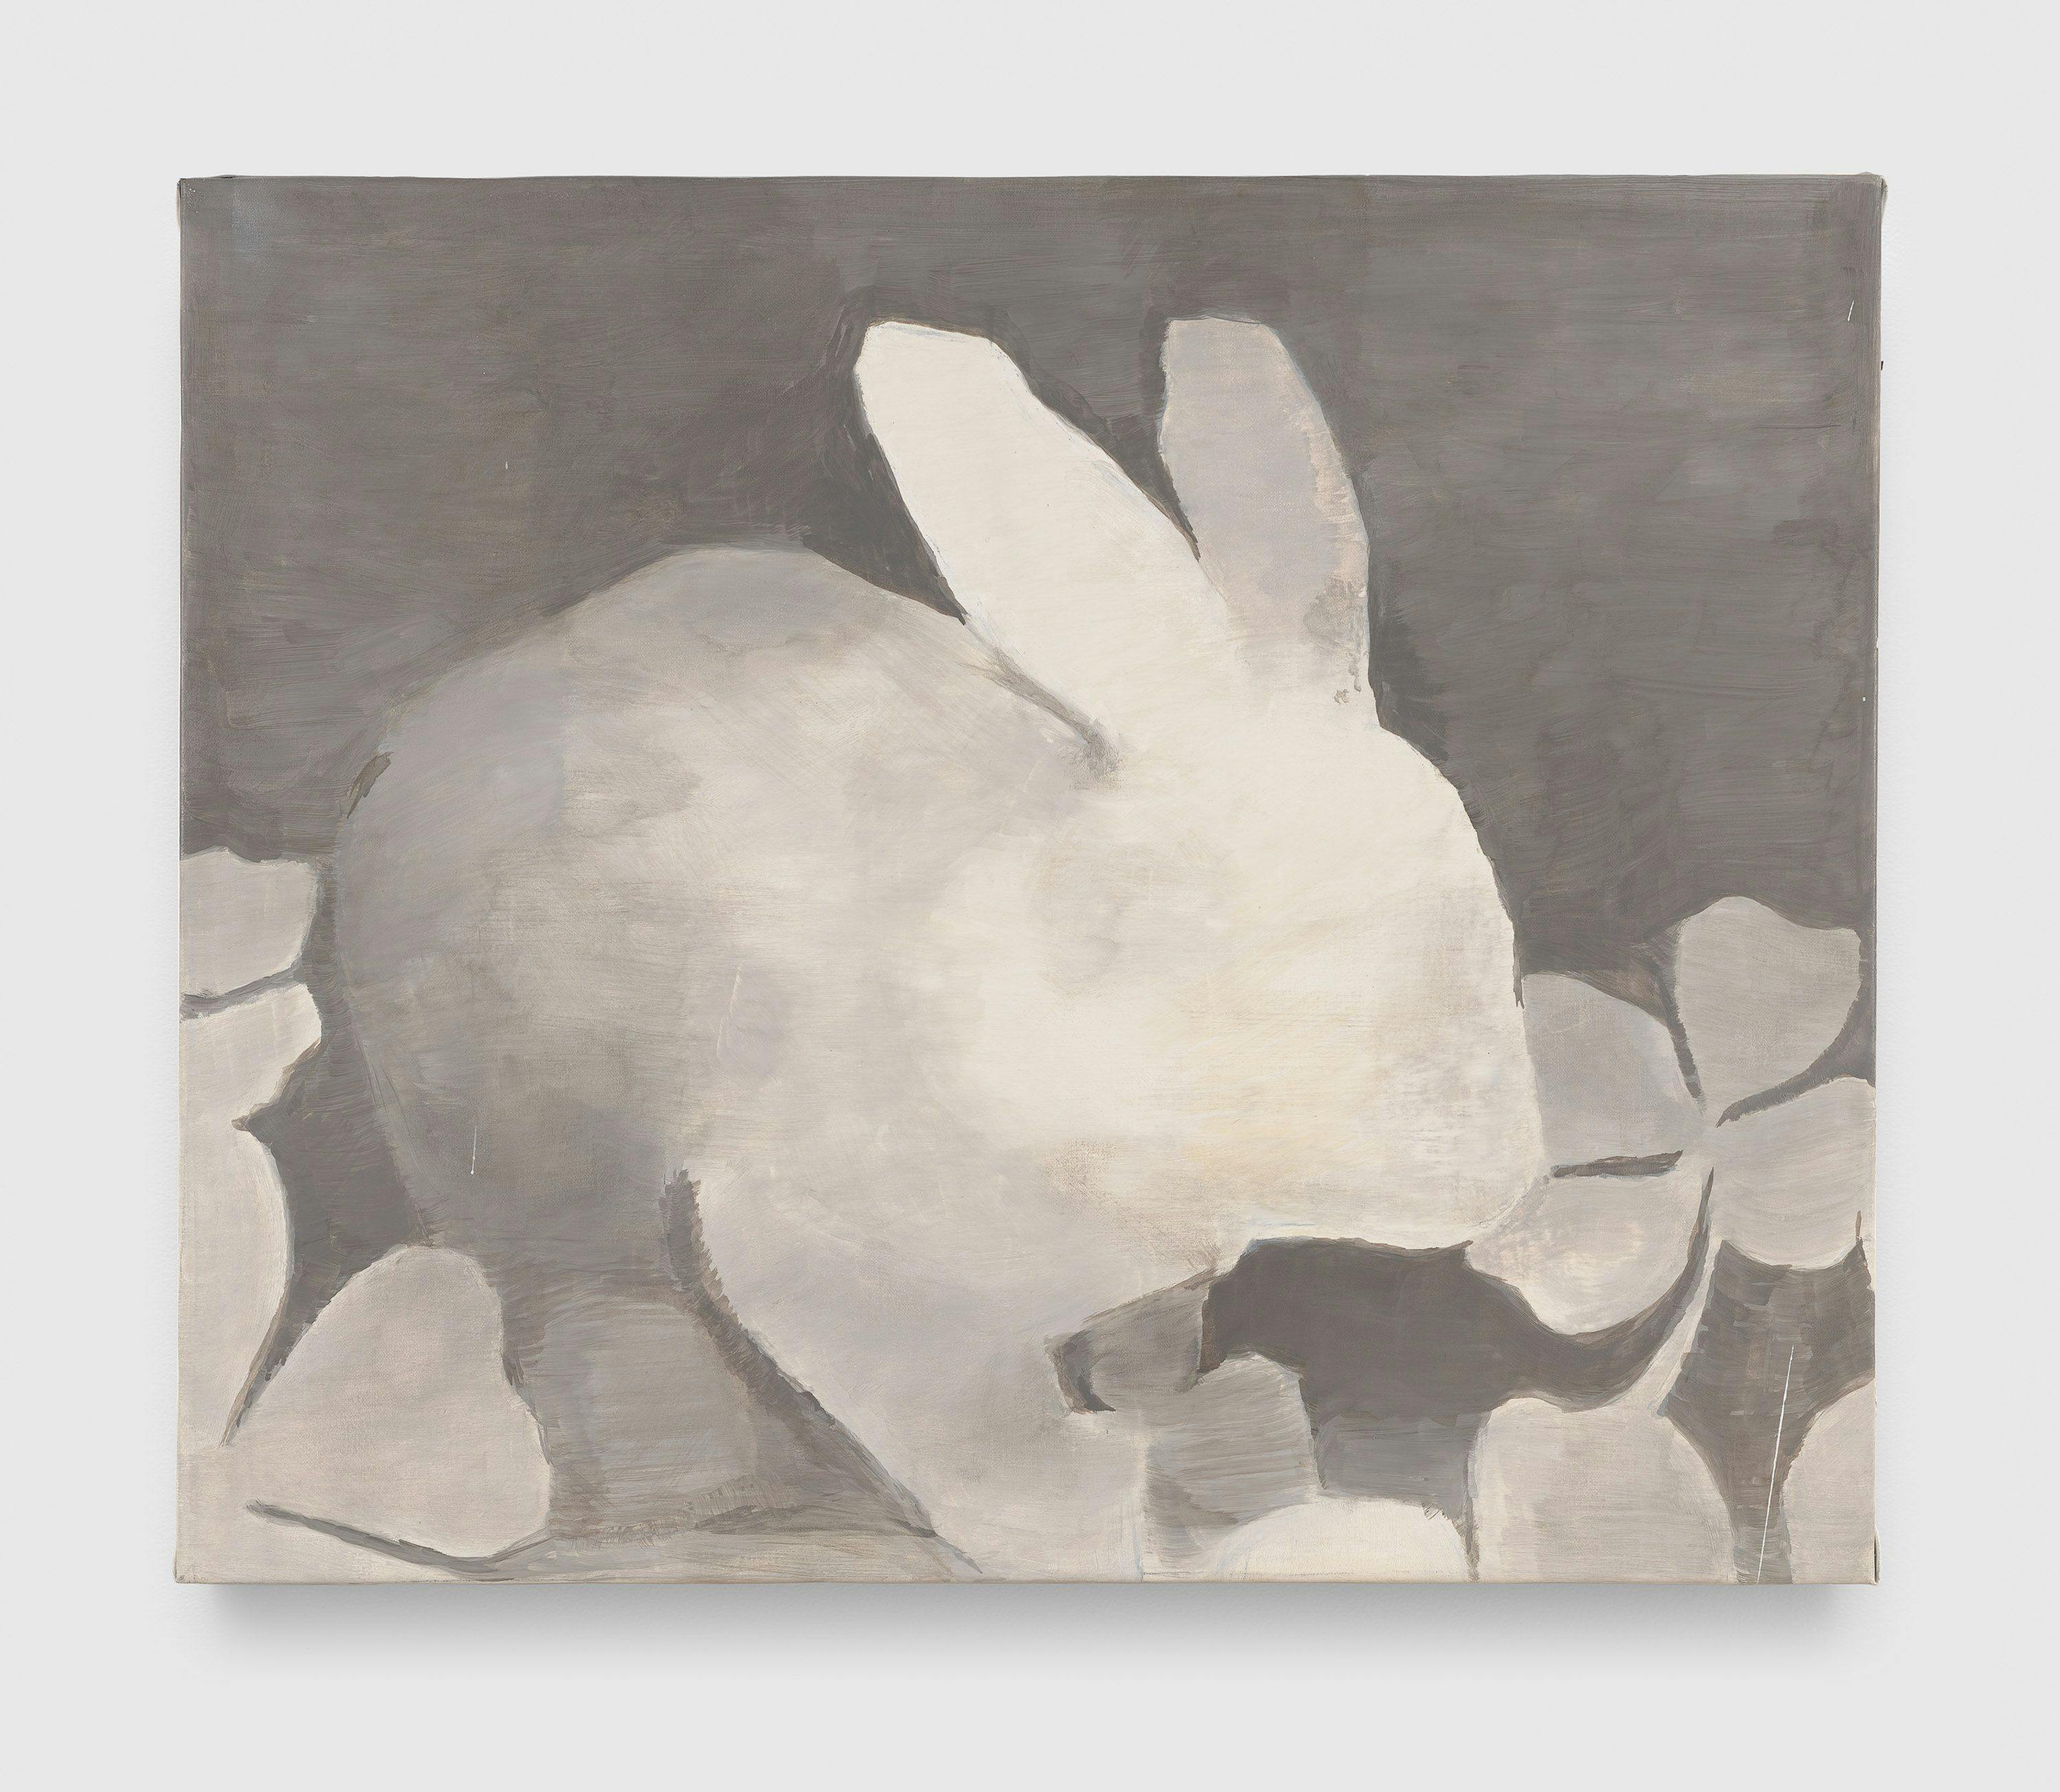 A painting by Luc Tuymans, titled Rabbit, dated 1994.